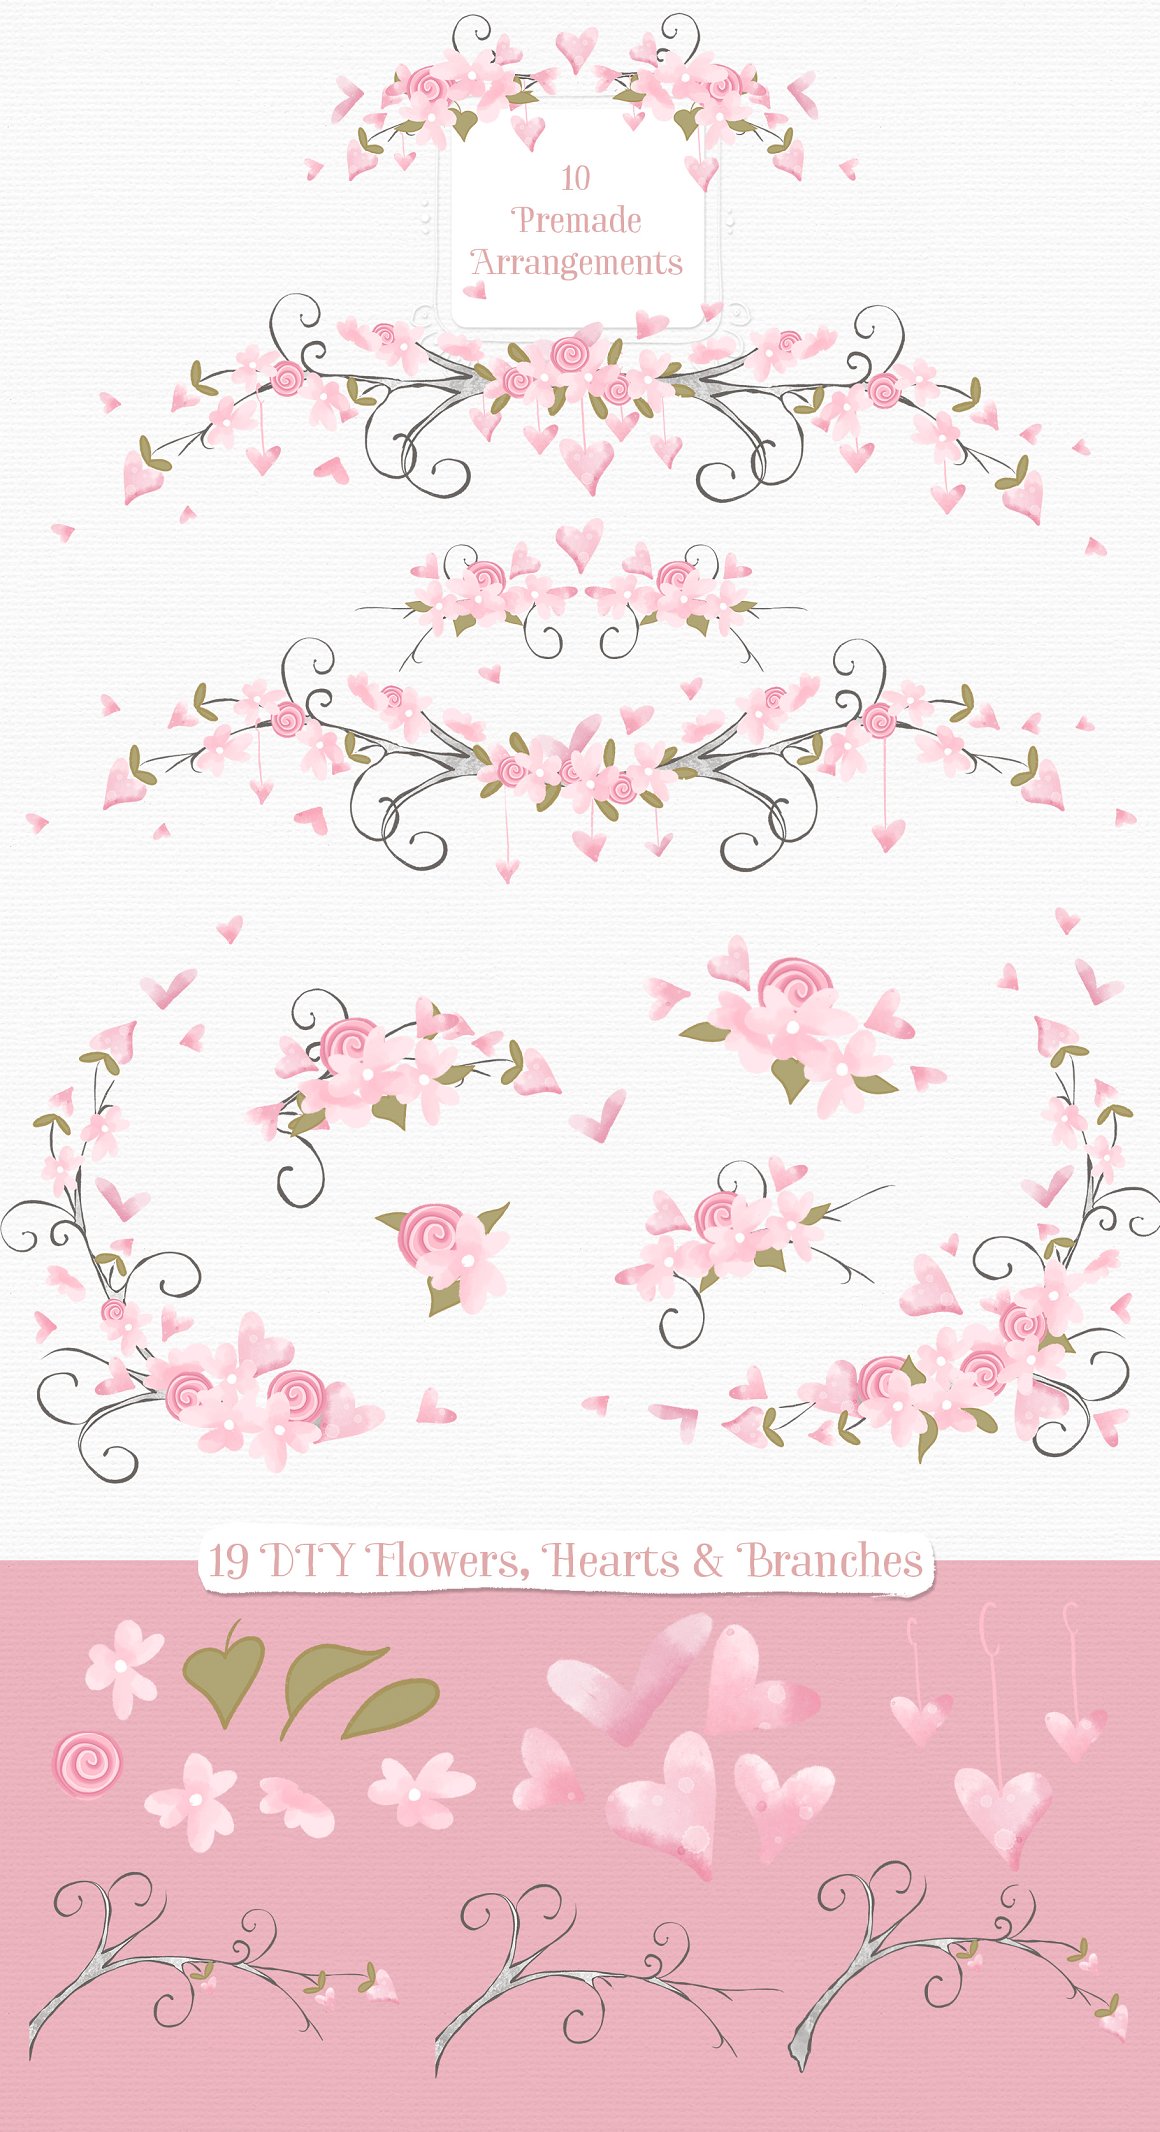 A set of 19 different DIY flowers, branches and hearts on a pink background.